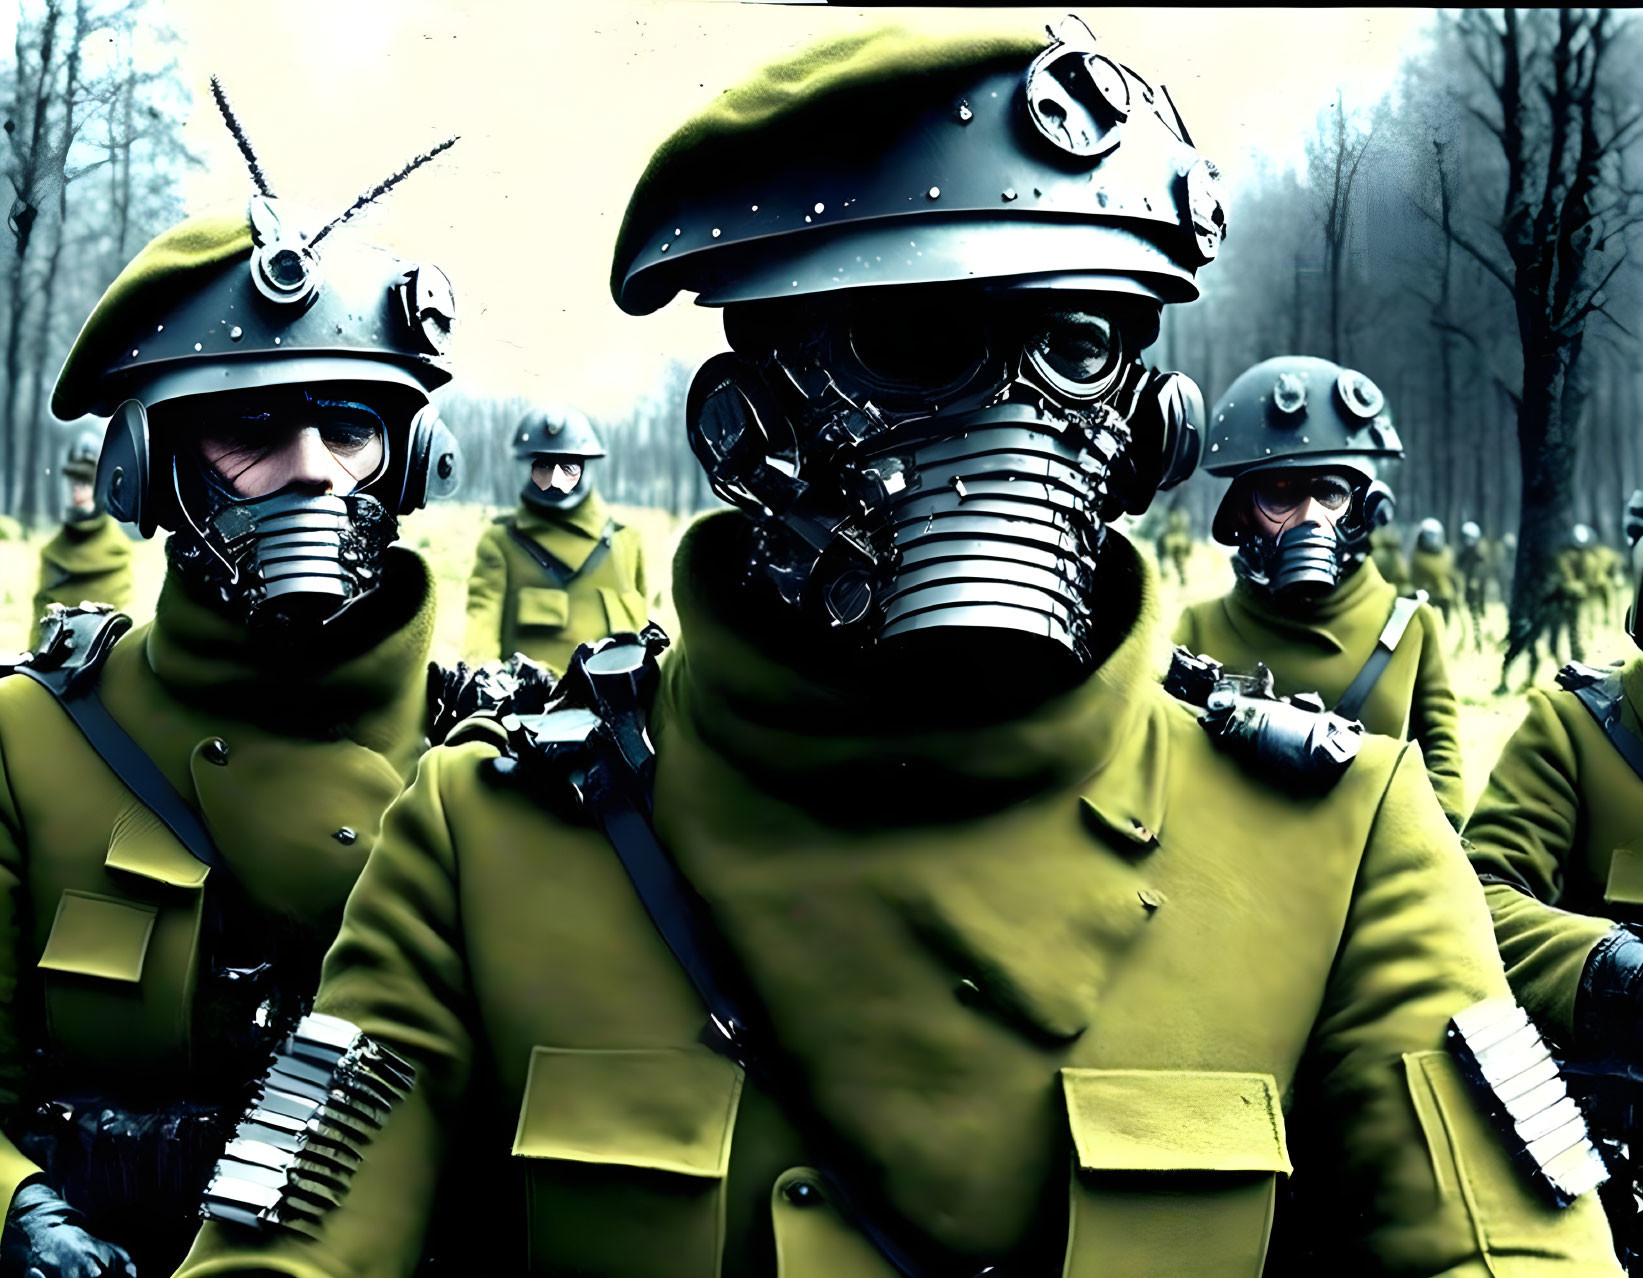 Futuristic armored soldiers in gas masks in misty forest